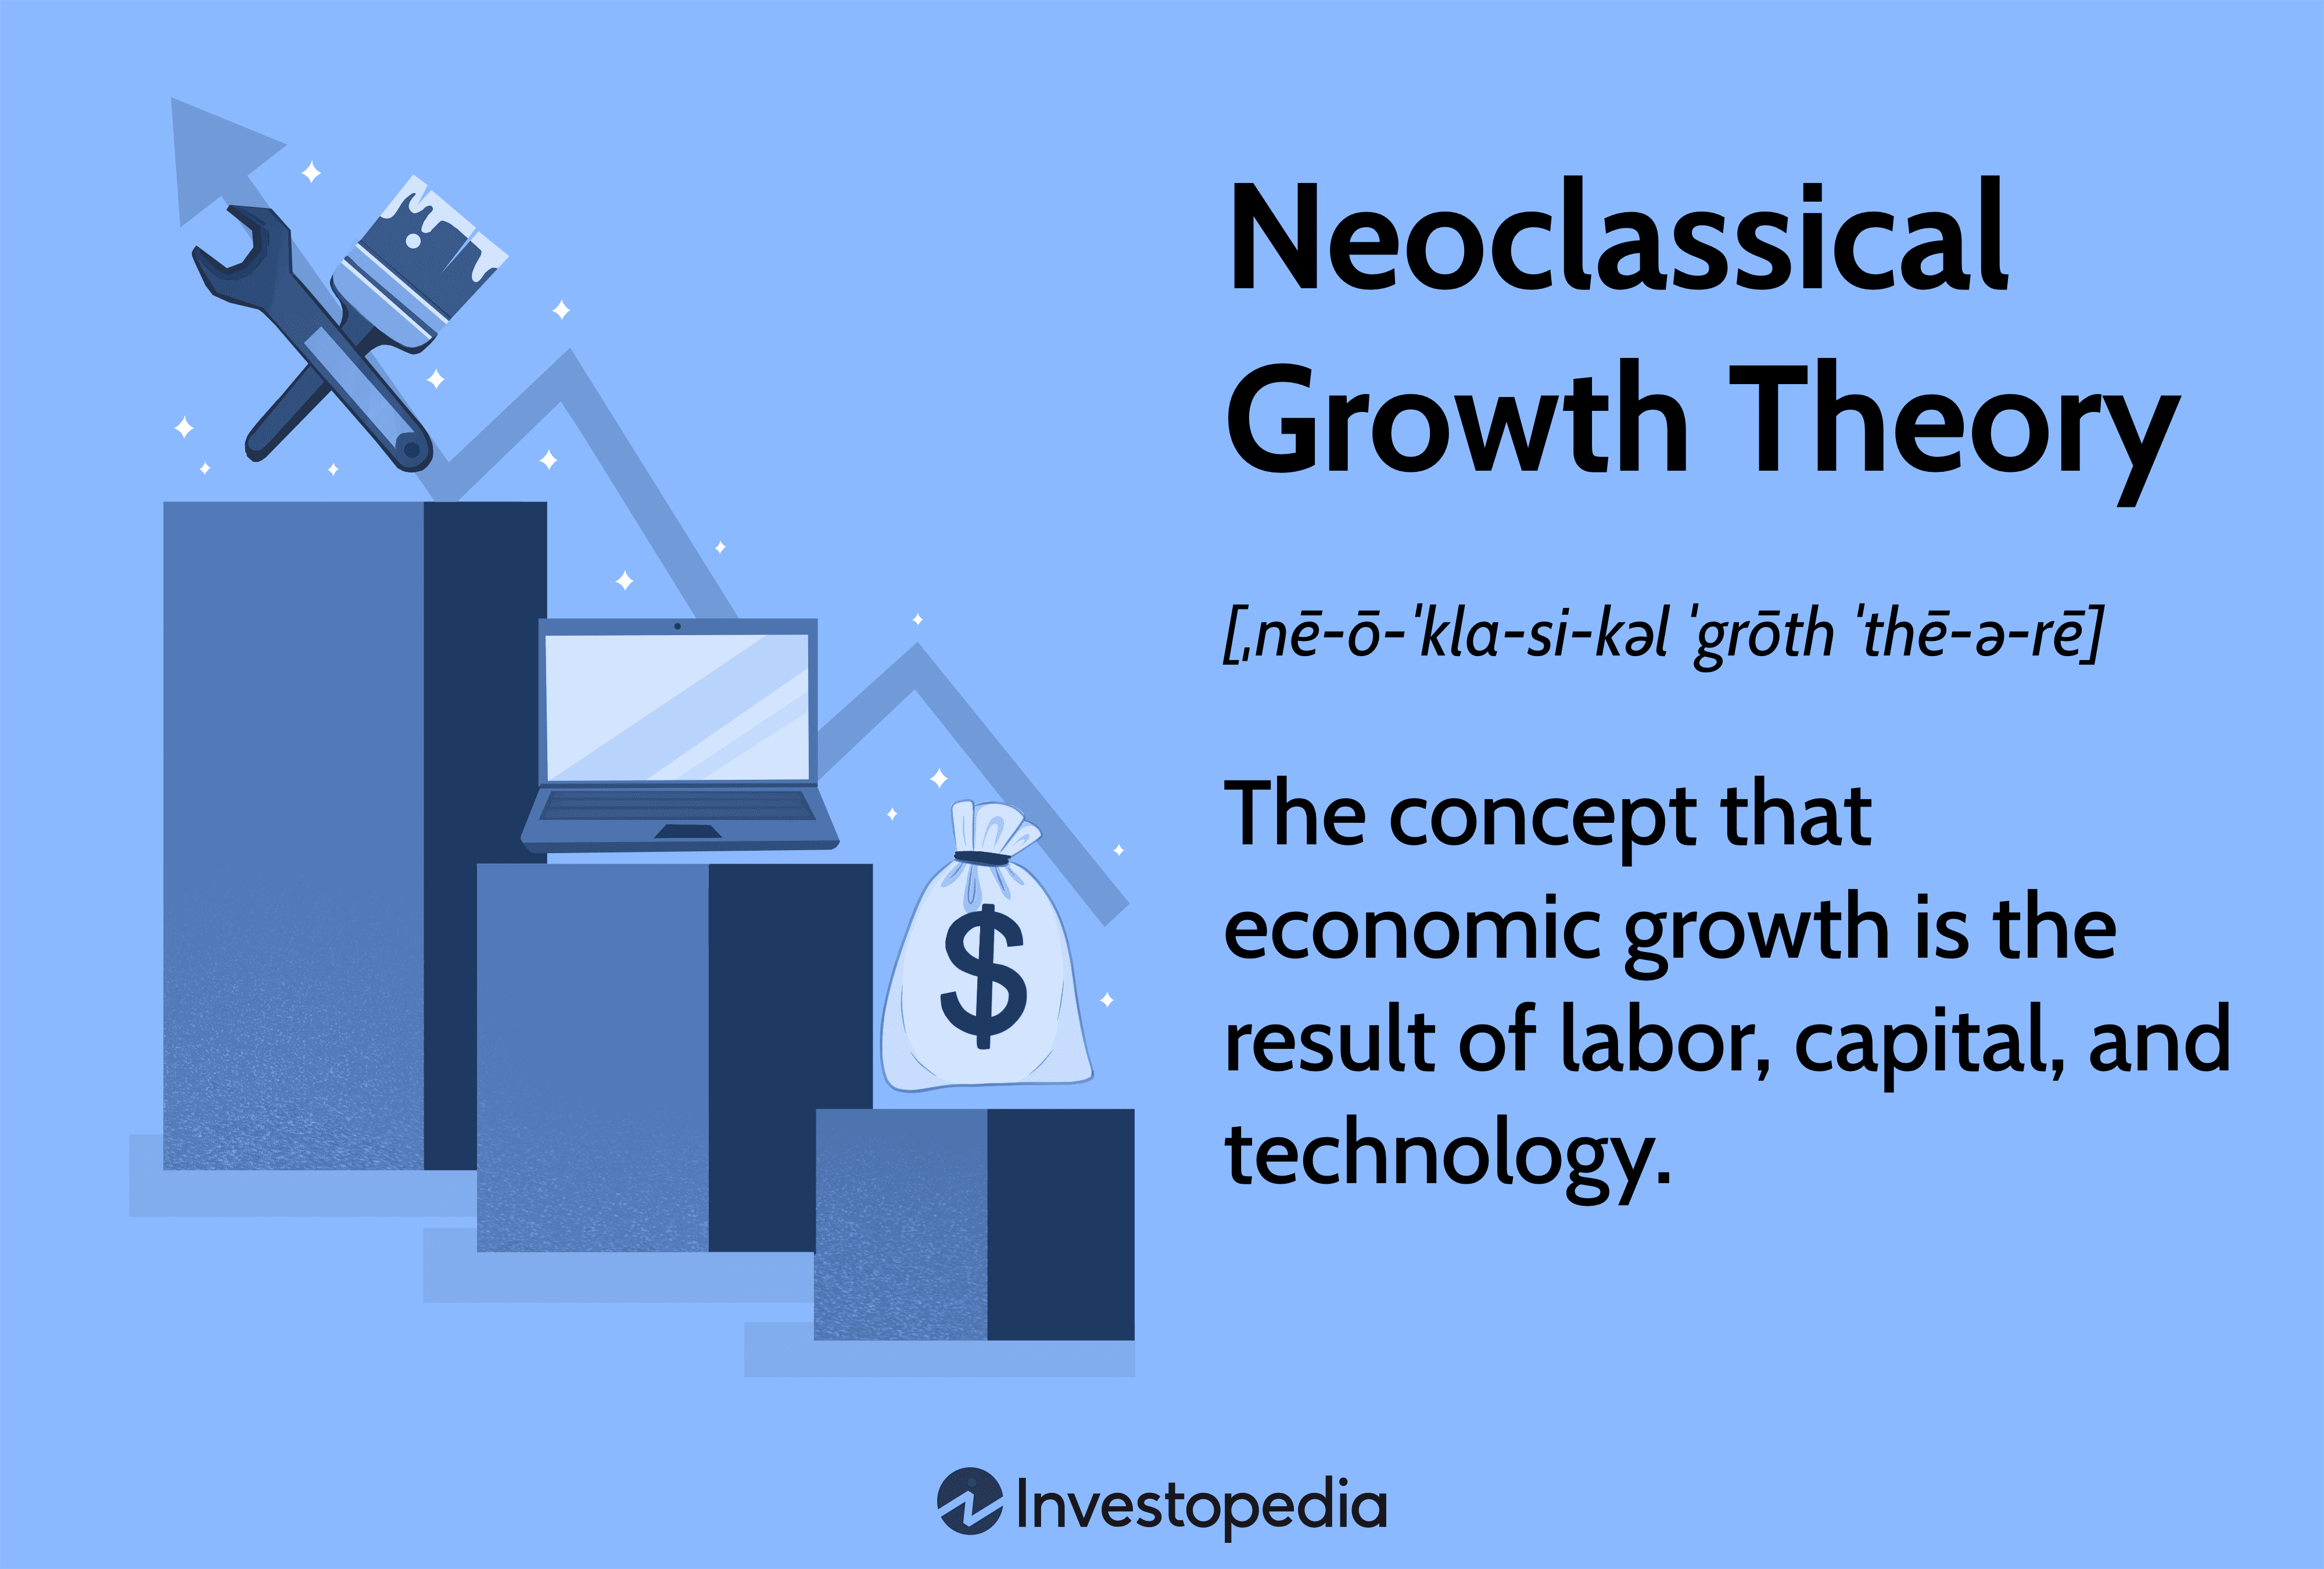 Neoclassical Growth Theory: The concept that economic growth is the result of labor, capital, and technology.